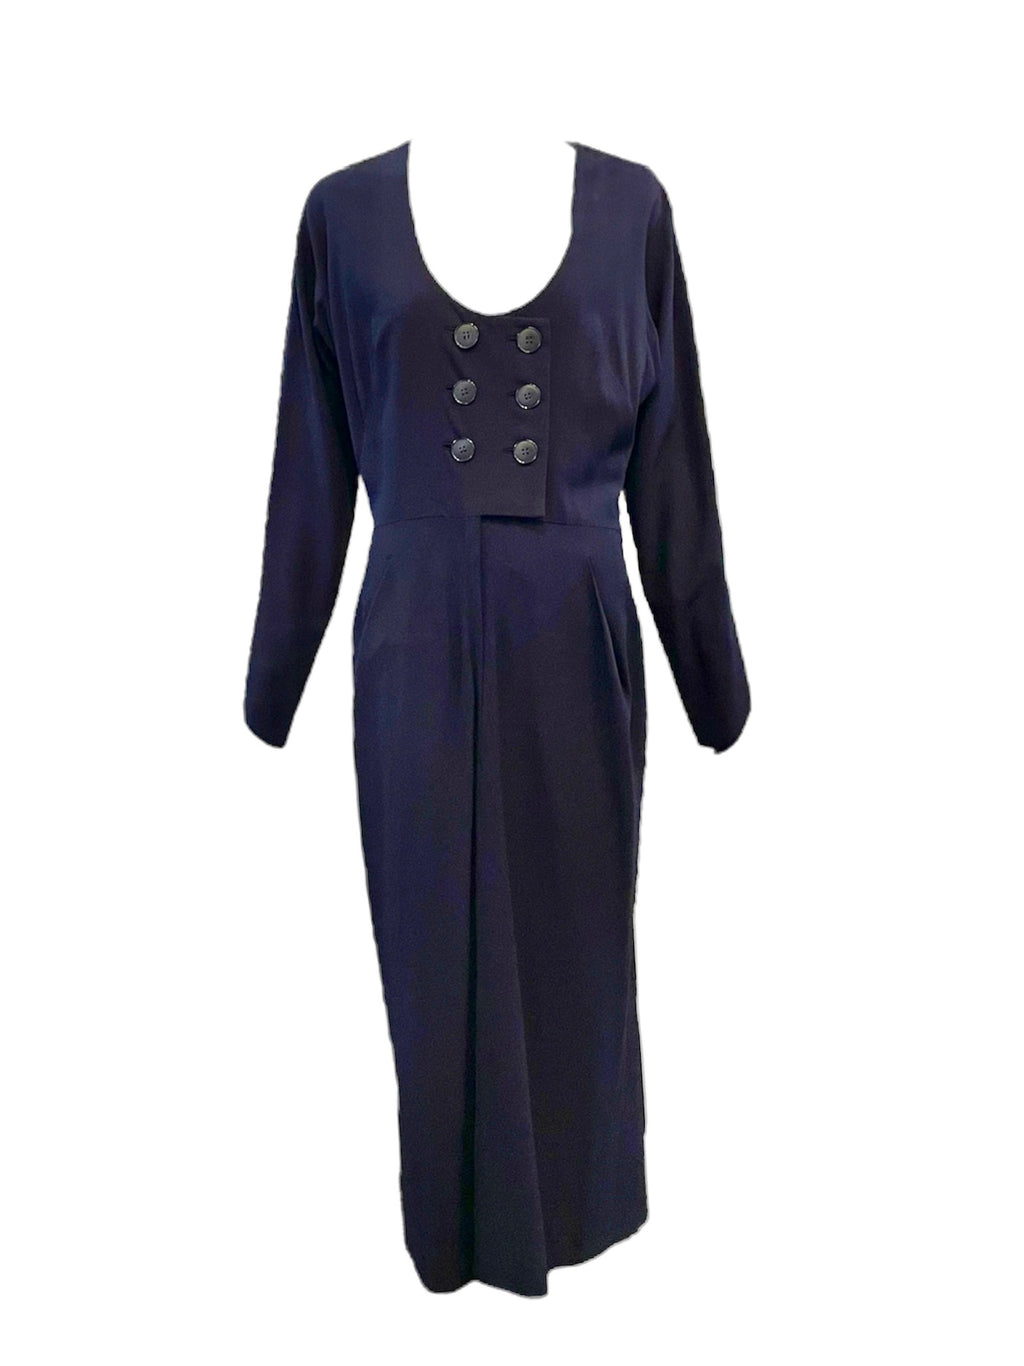 Irene 50s Dramatic Navy Blue Crepe Afternoon Dress